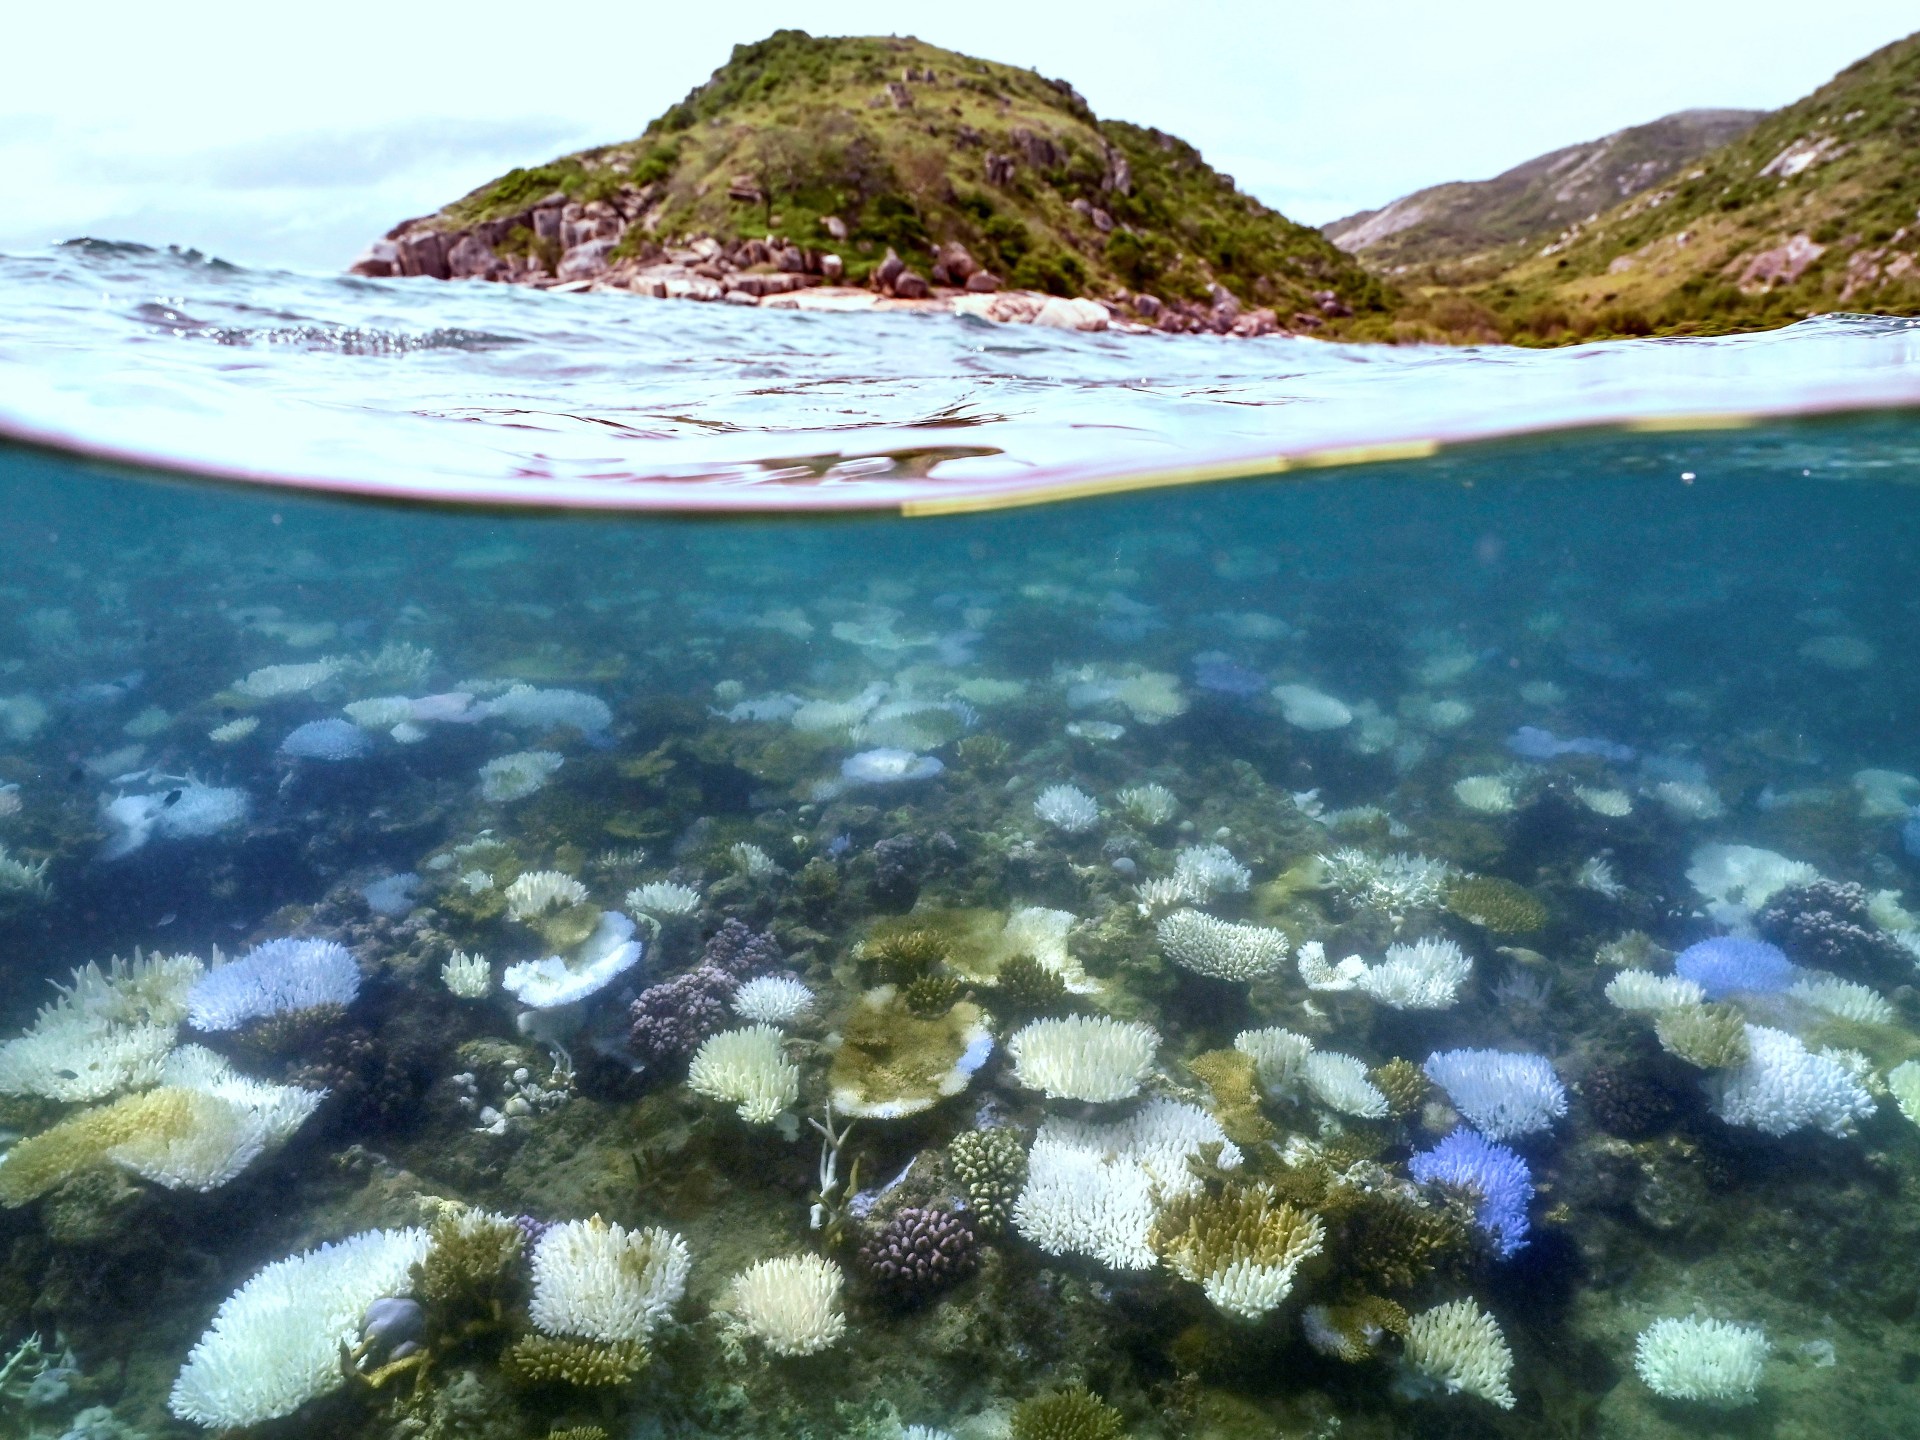 Australia’s Great Barrier Reef suffers worst bleaching on record